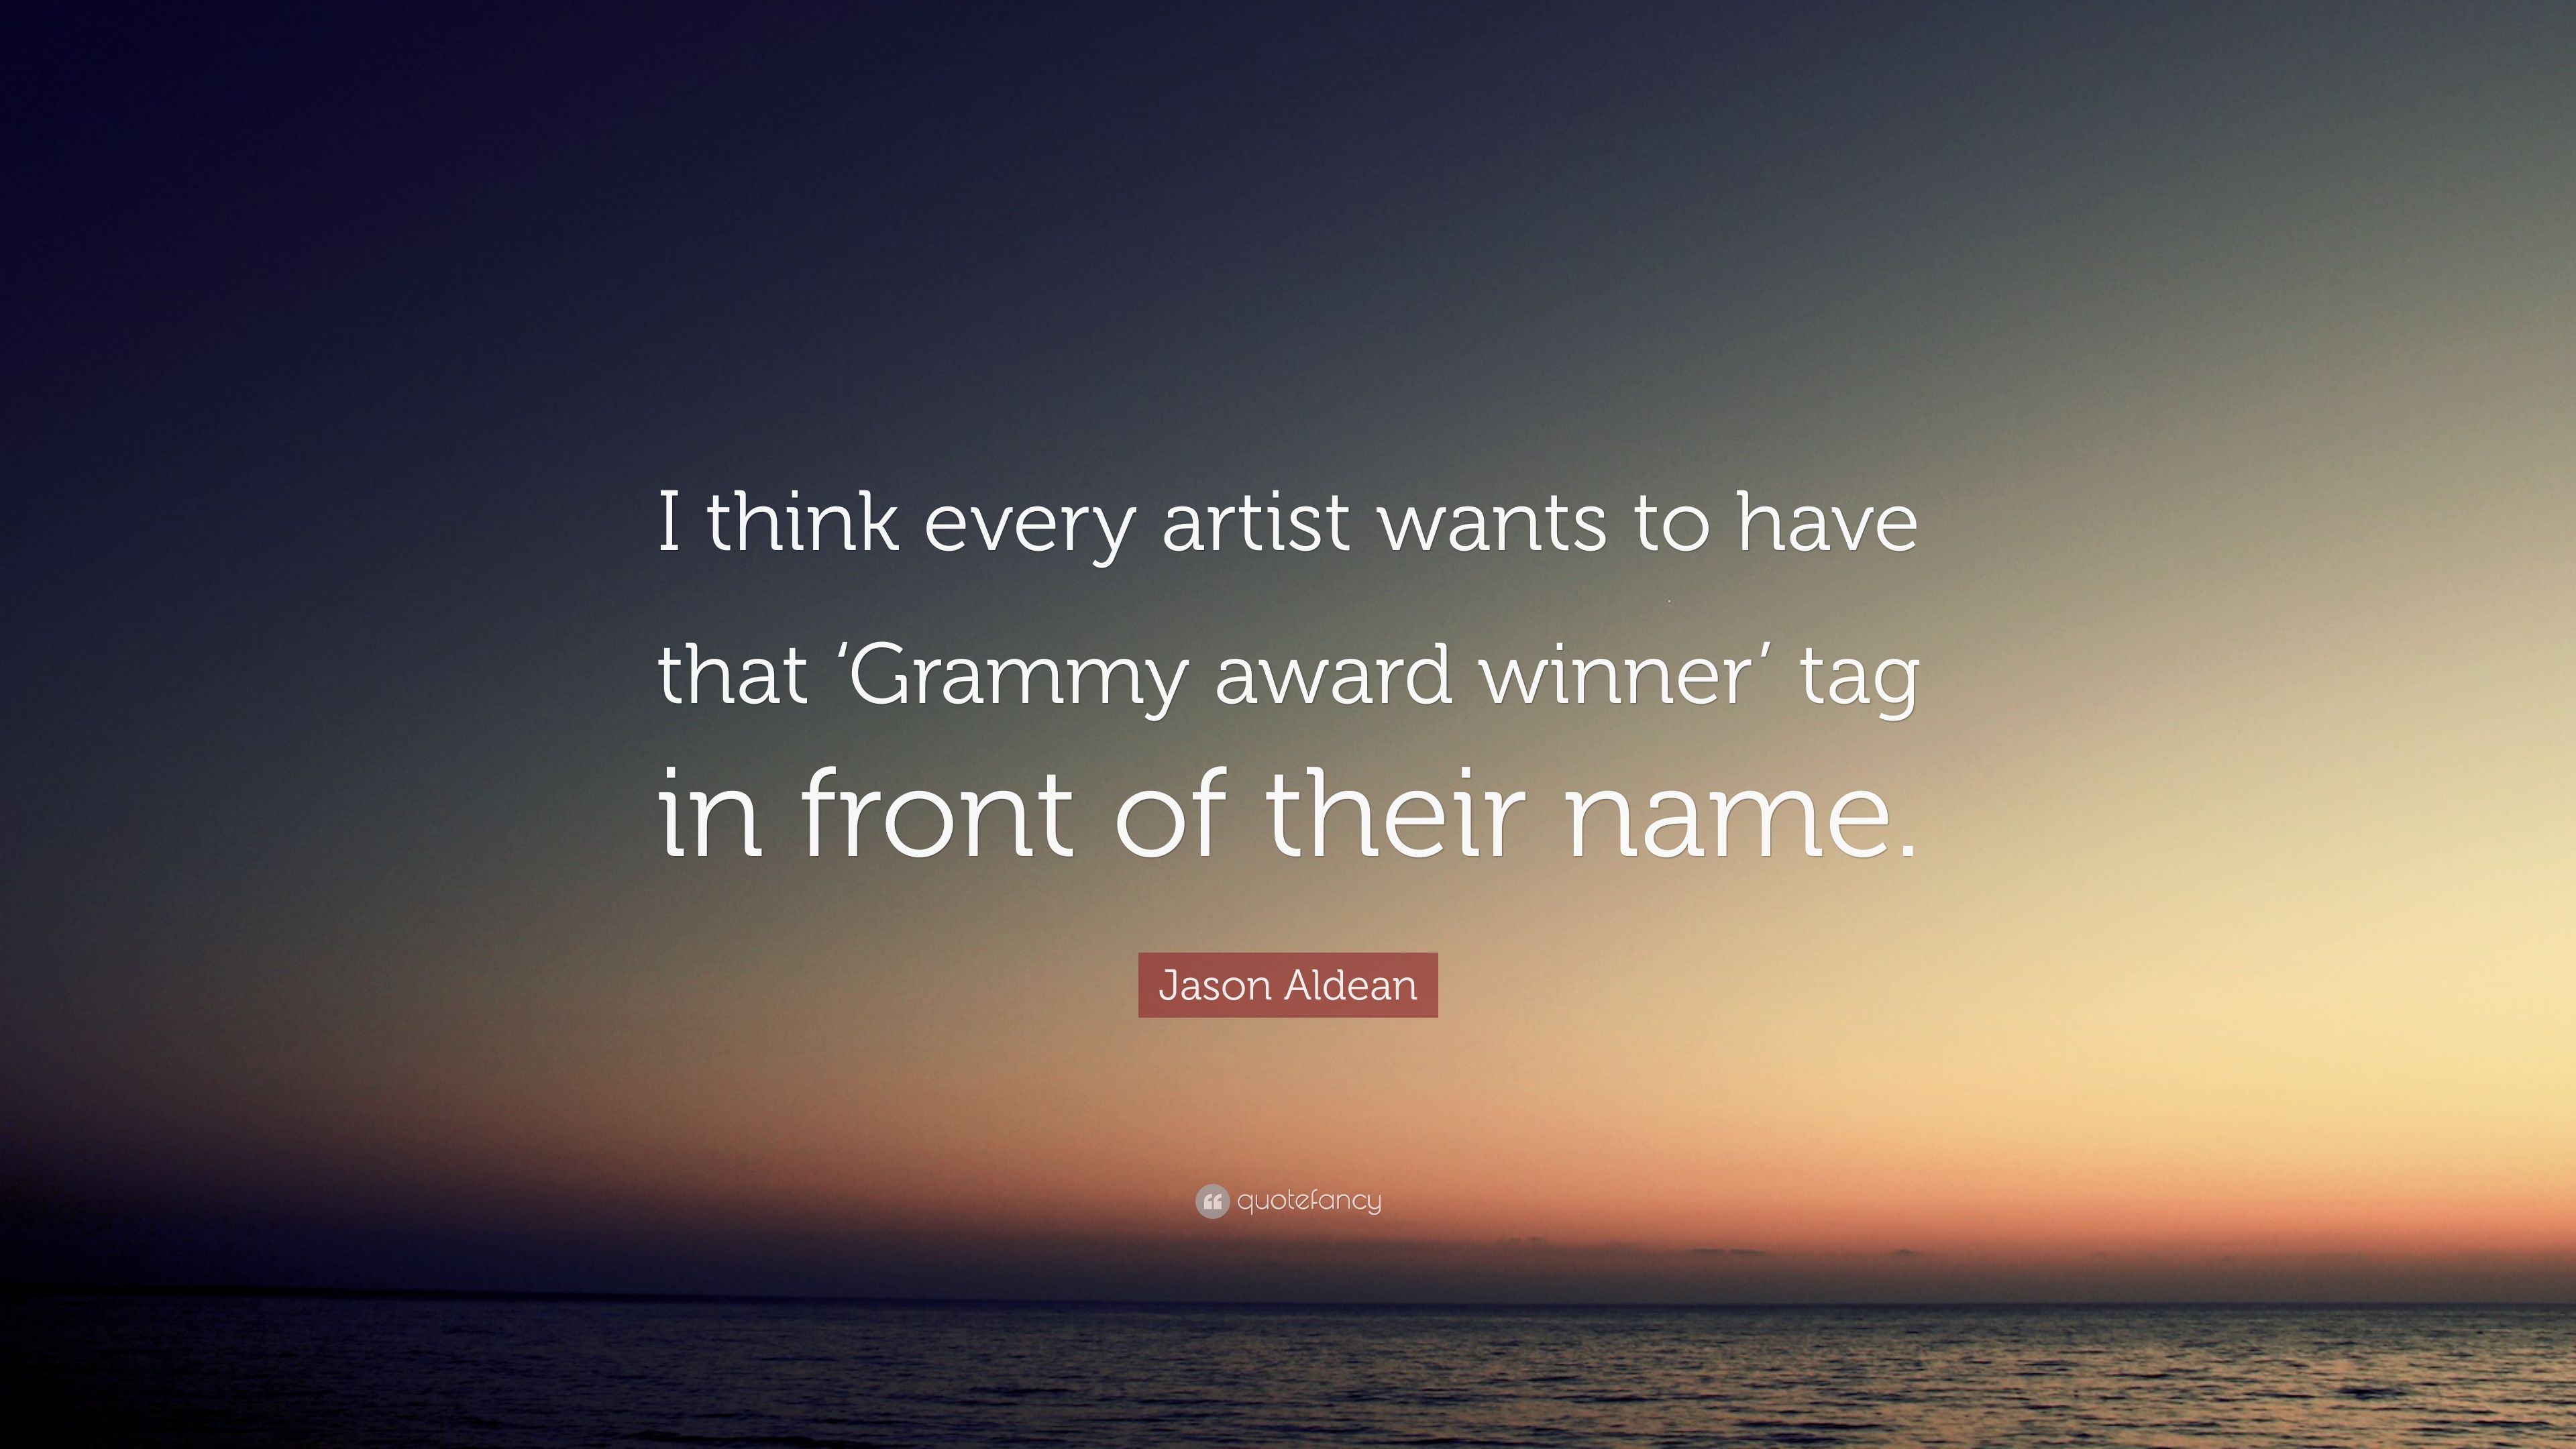 Jason Aldean Quote: “I think every artist wants to have that